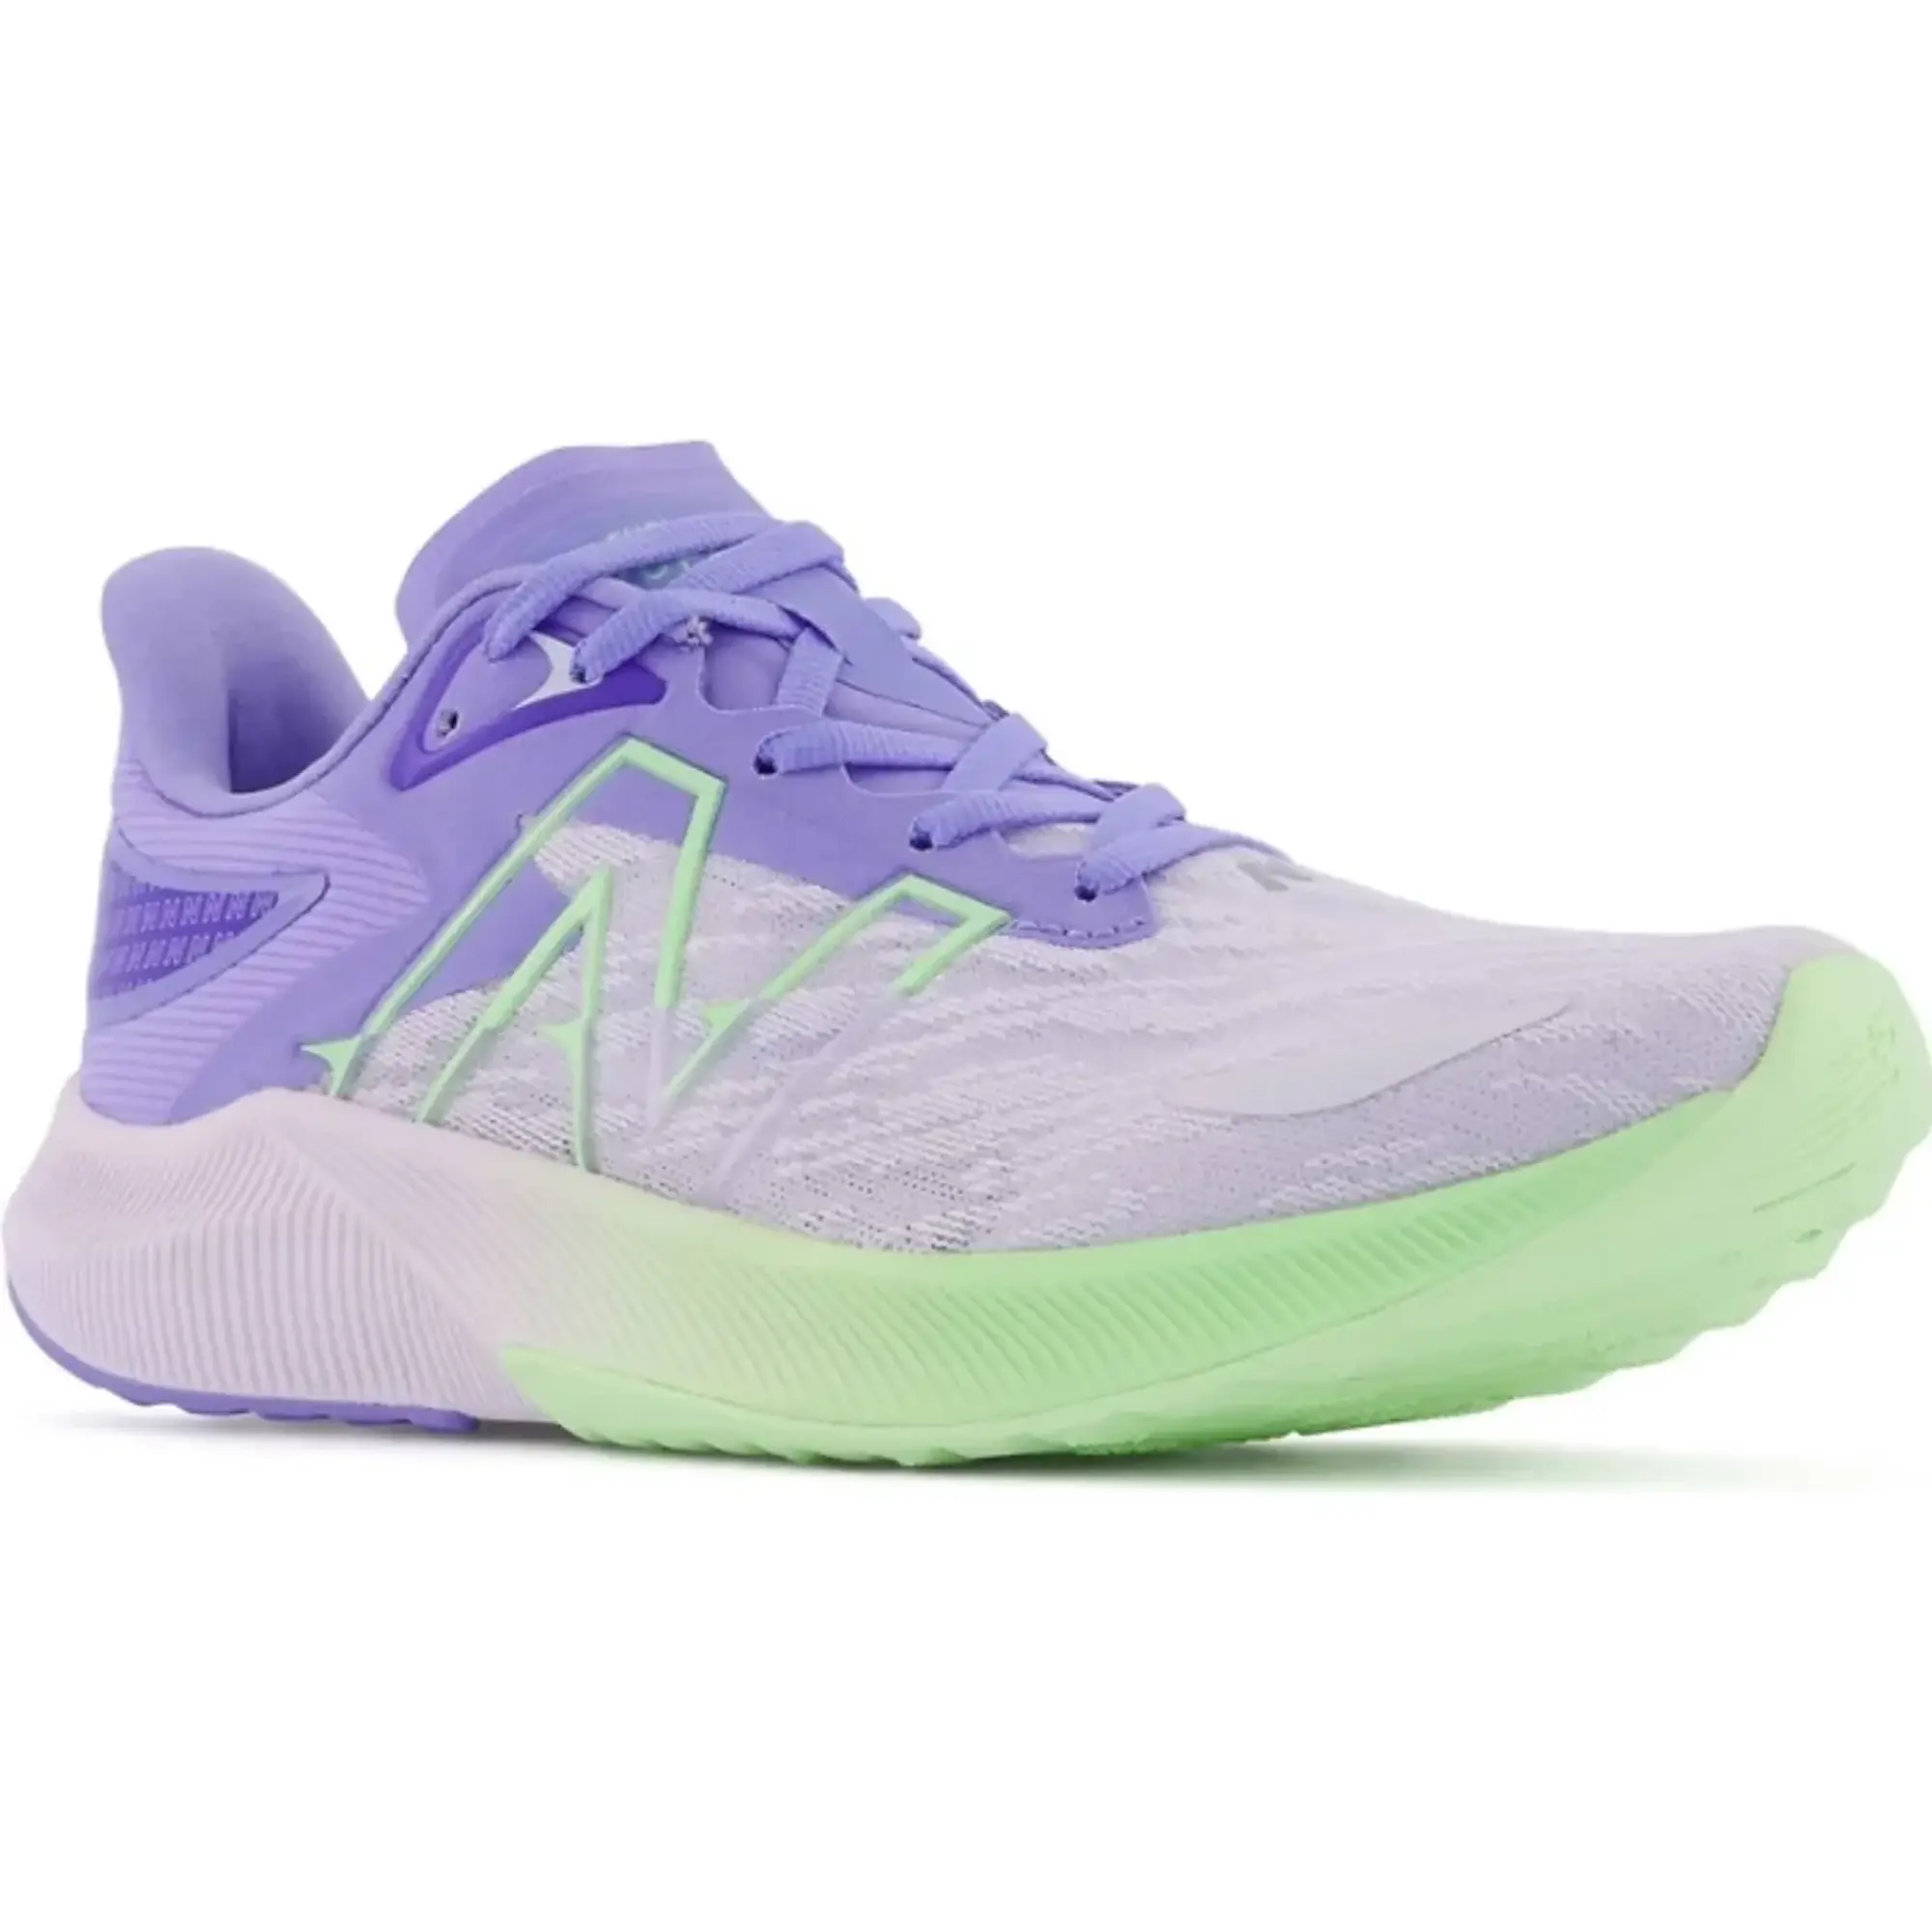 New Balance Running Fuelcell Propel Trainers In Purple And Lime-Multi